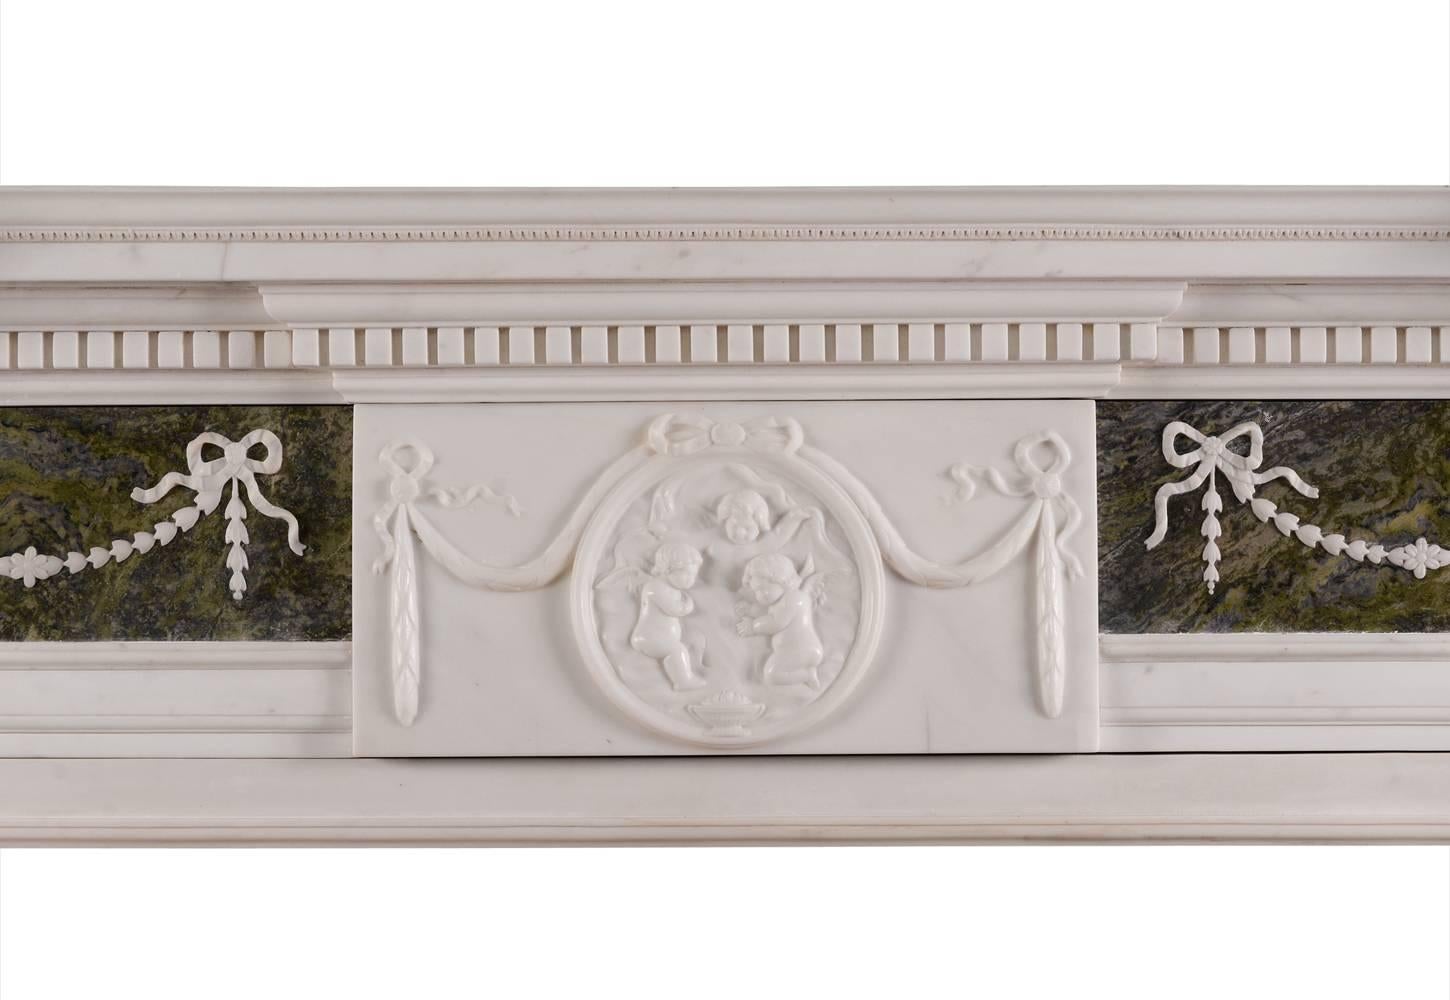 A fine quality George II English marble fireplace in statuary and connemara marble. The jambs with connemara green marble columns surmounted by delicately carved stiff acanthus leaves and ionic capitals. The frieze with statuary marble centre plaque